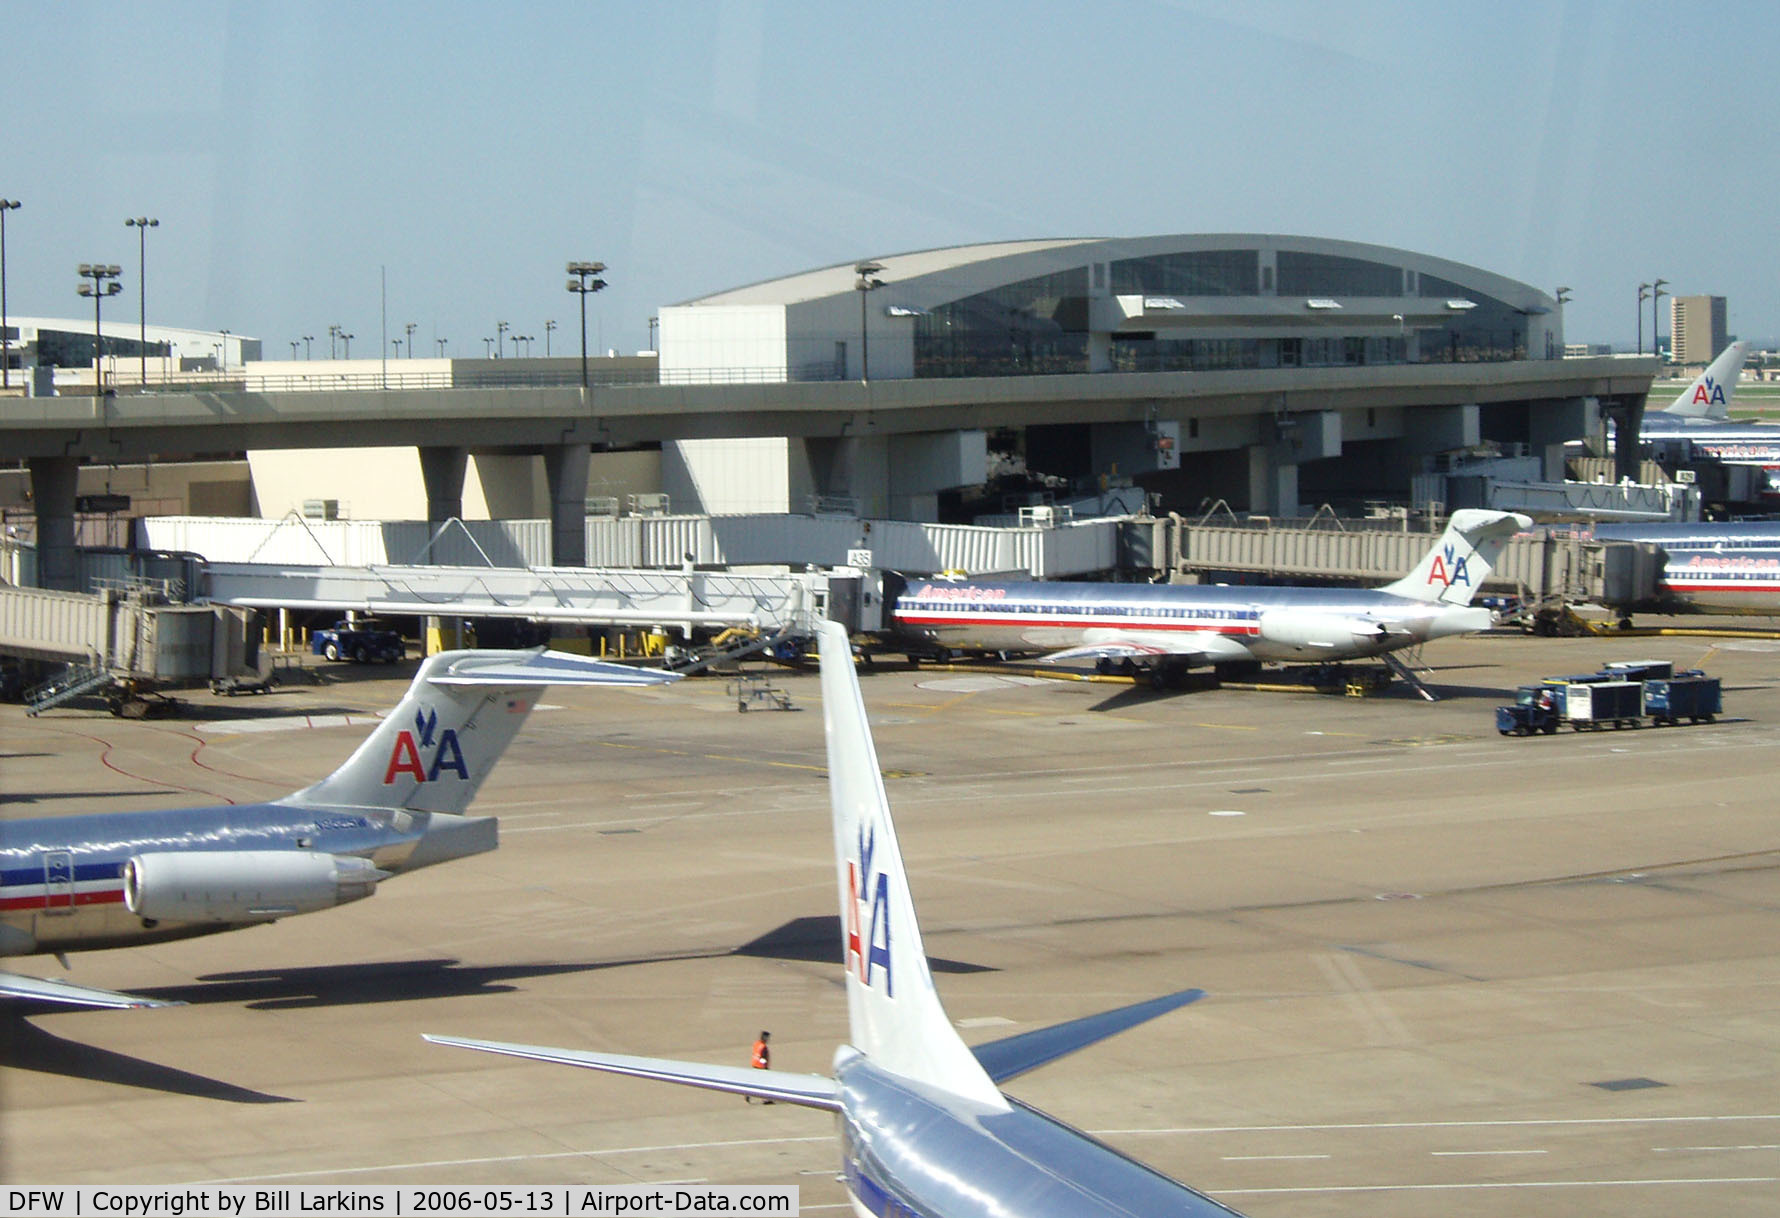 Dallas/fort Worth International Airport (DFW) - Ramp area with airport Tram above.